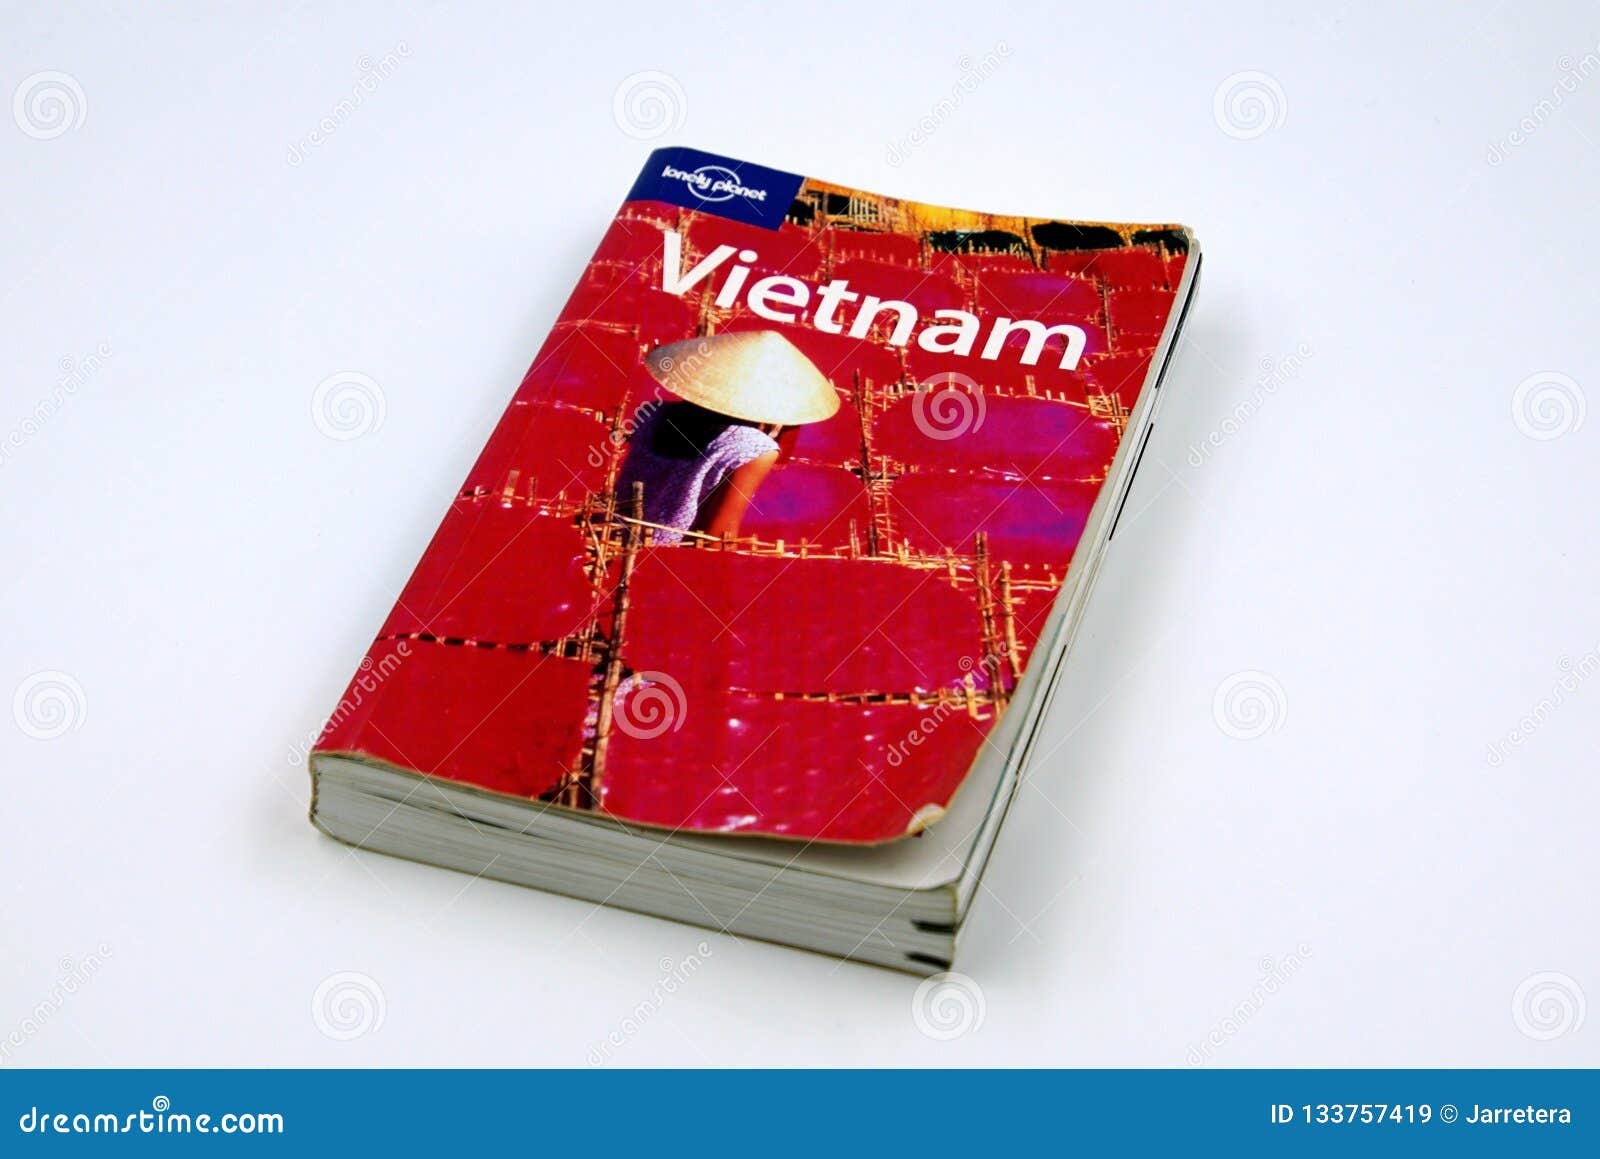 Lonely Planet Vietnam Travel Guide Editorial Stock Image - Image of brand,  isolated: 133757419